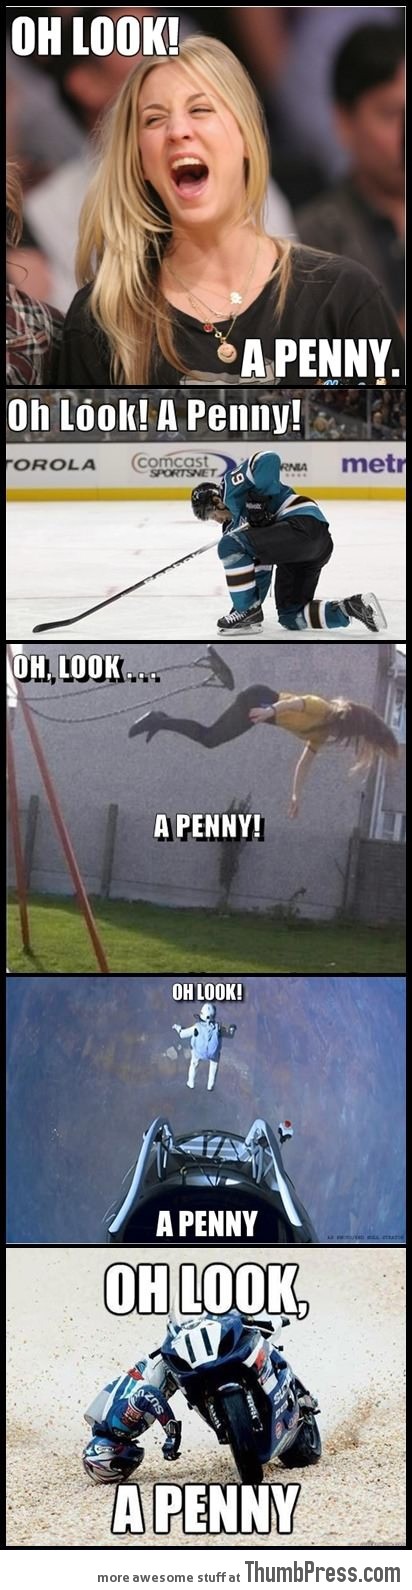 Oh look, a penny